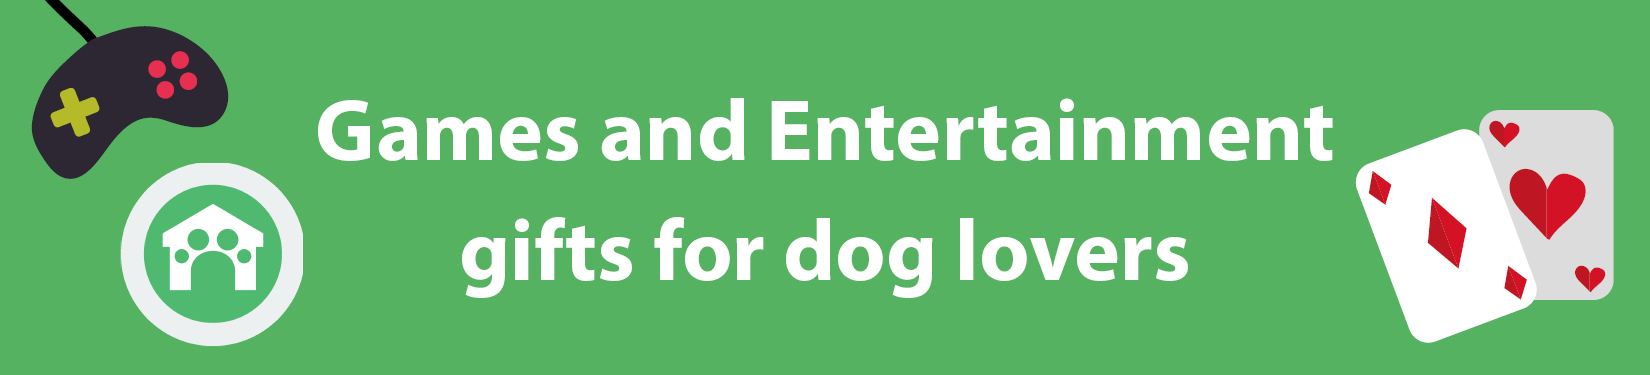 Games and entertainment gifts for dog lovers header image